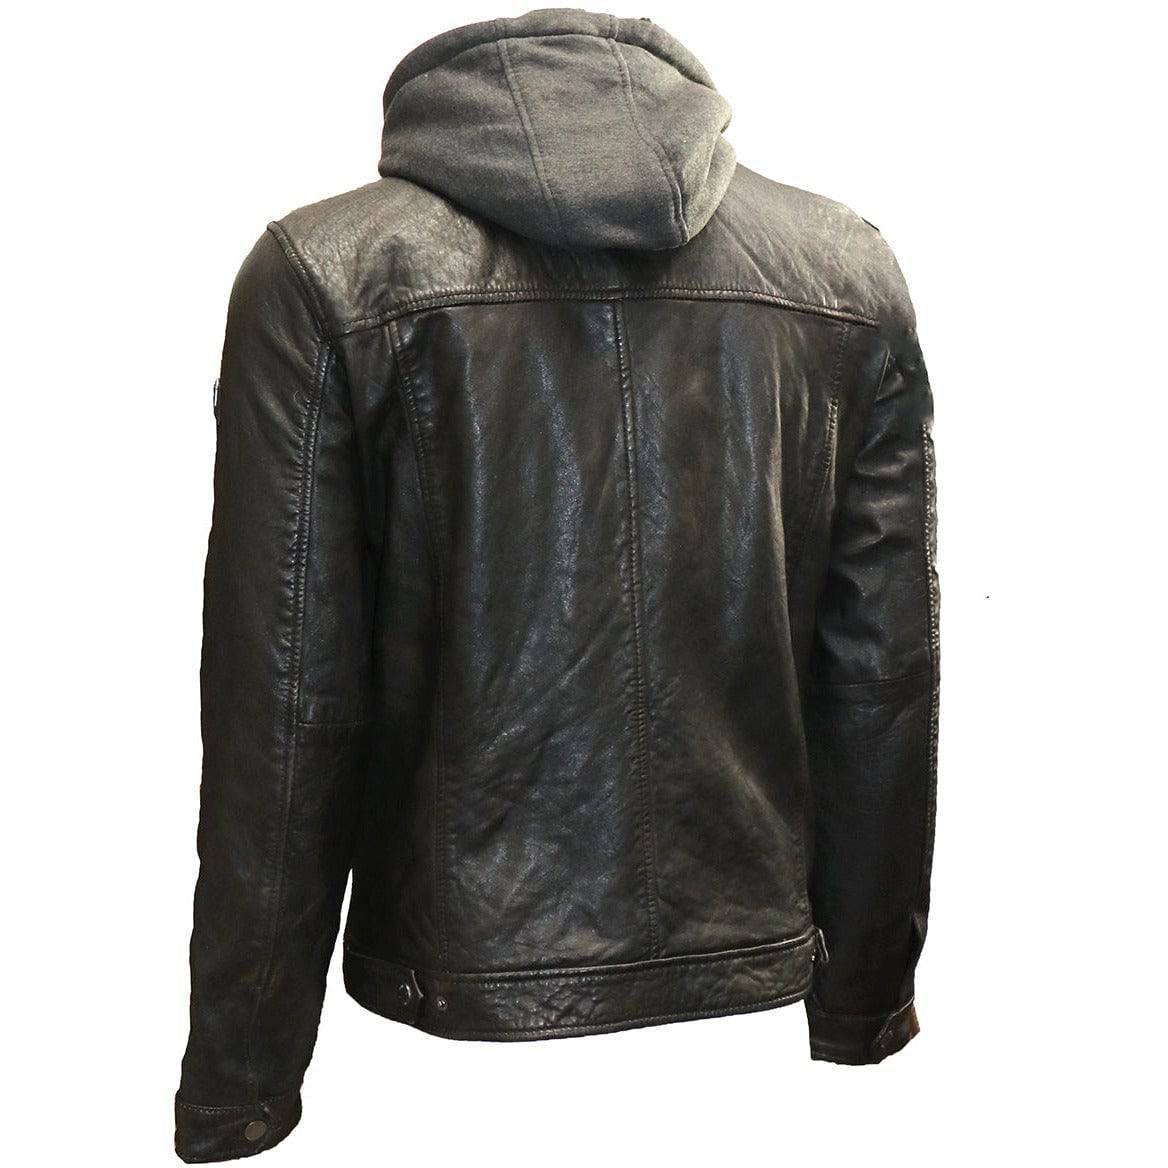 Mauritius Men's Trucker Leather Jacket with Hood